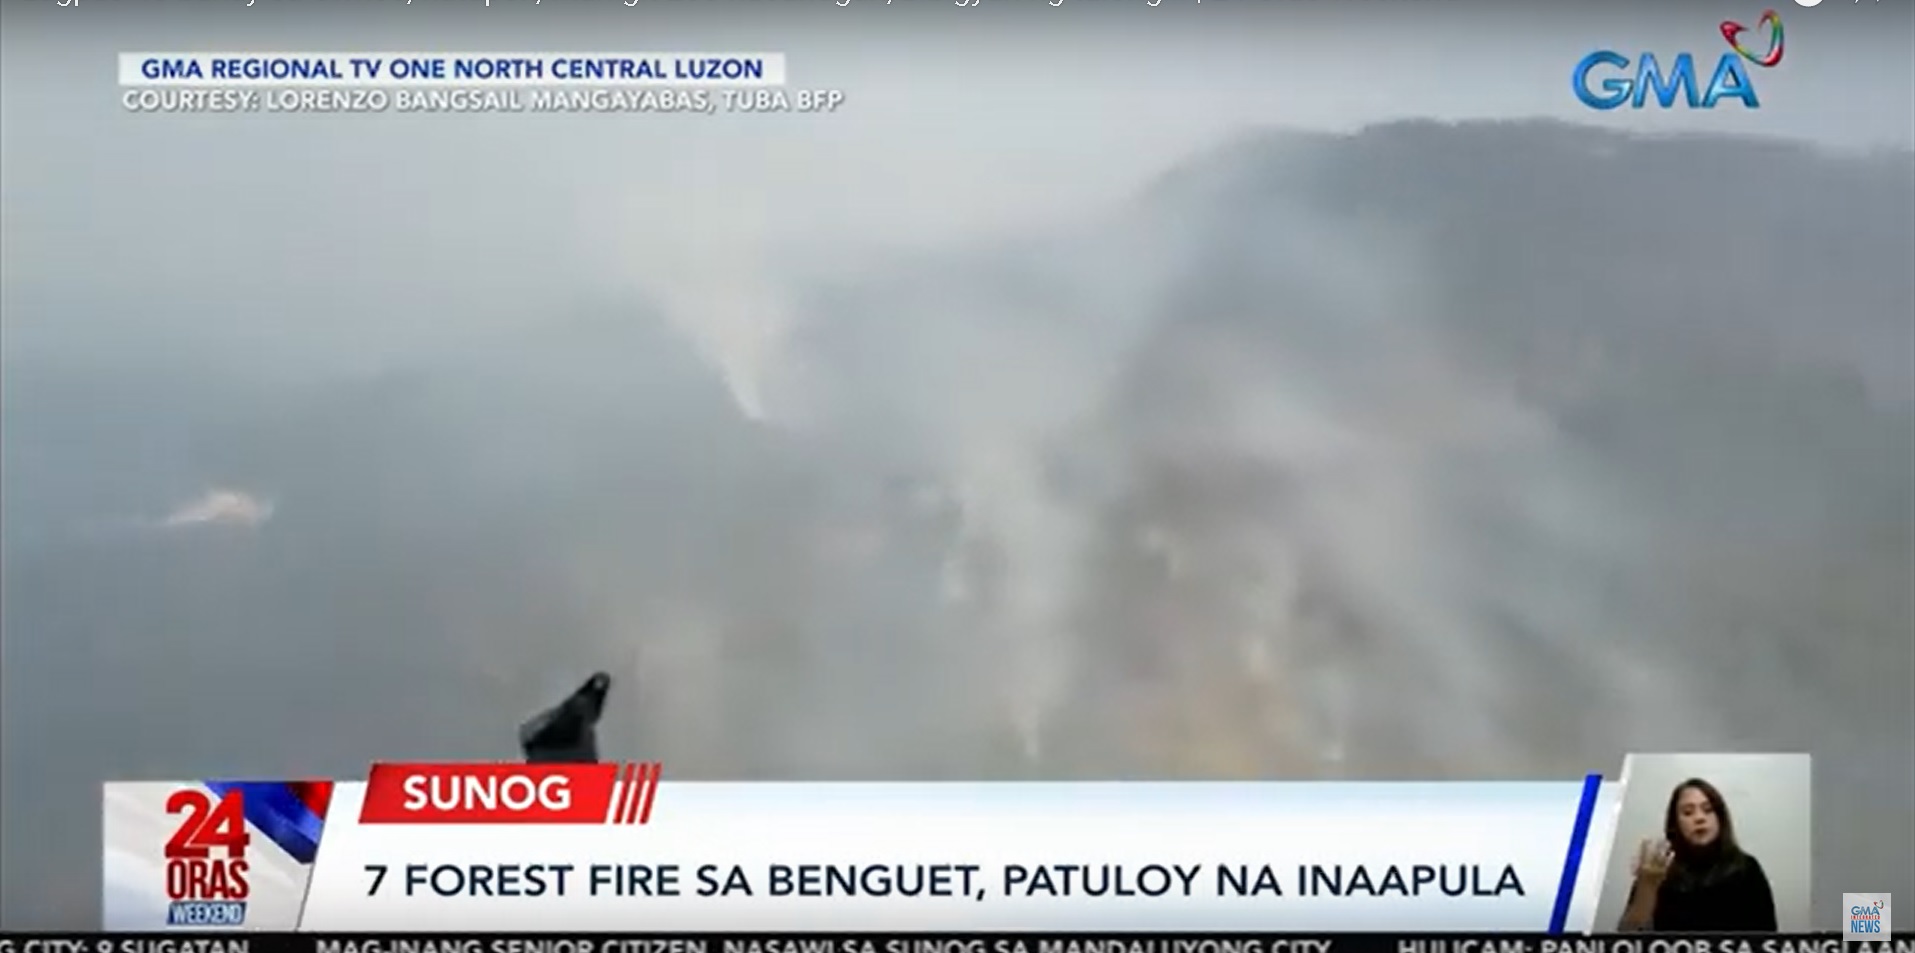 Over 1,000 hectares hit by forest fires in Benguet thumbnail